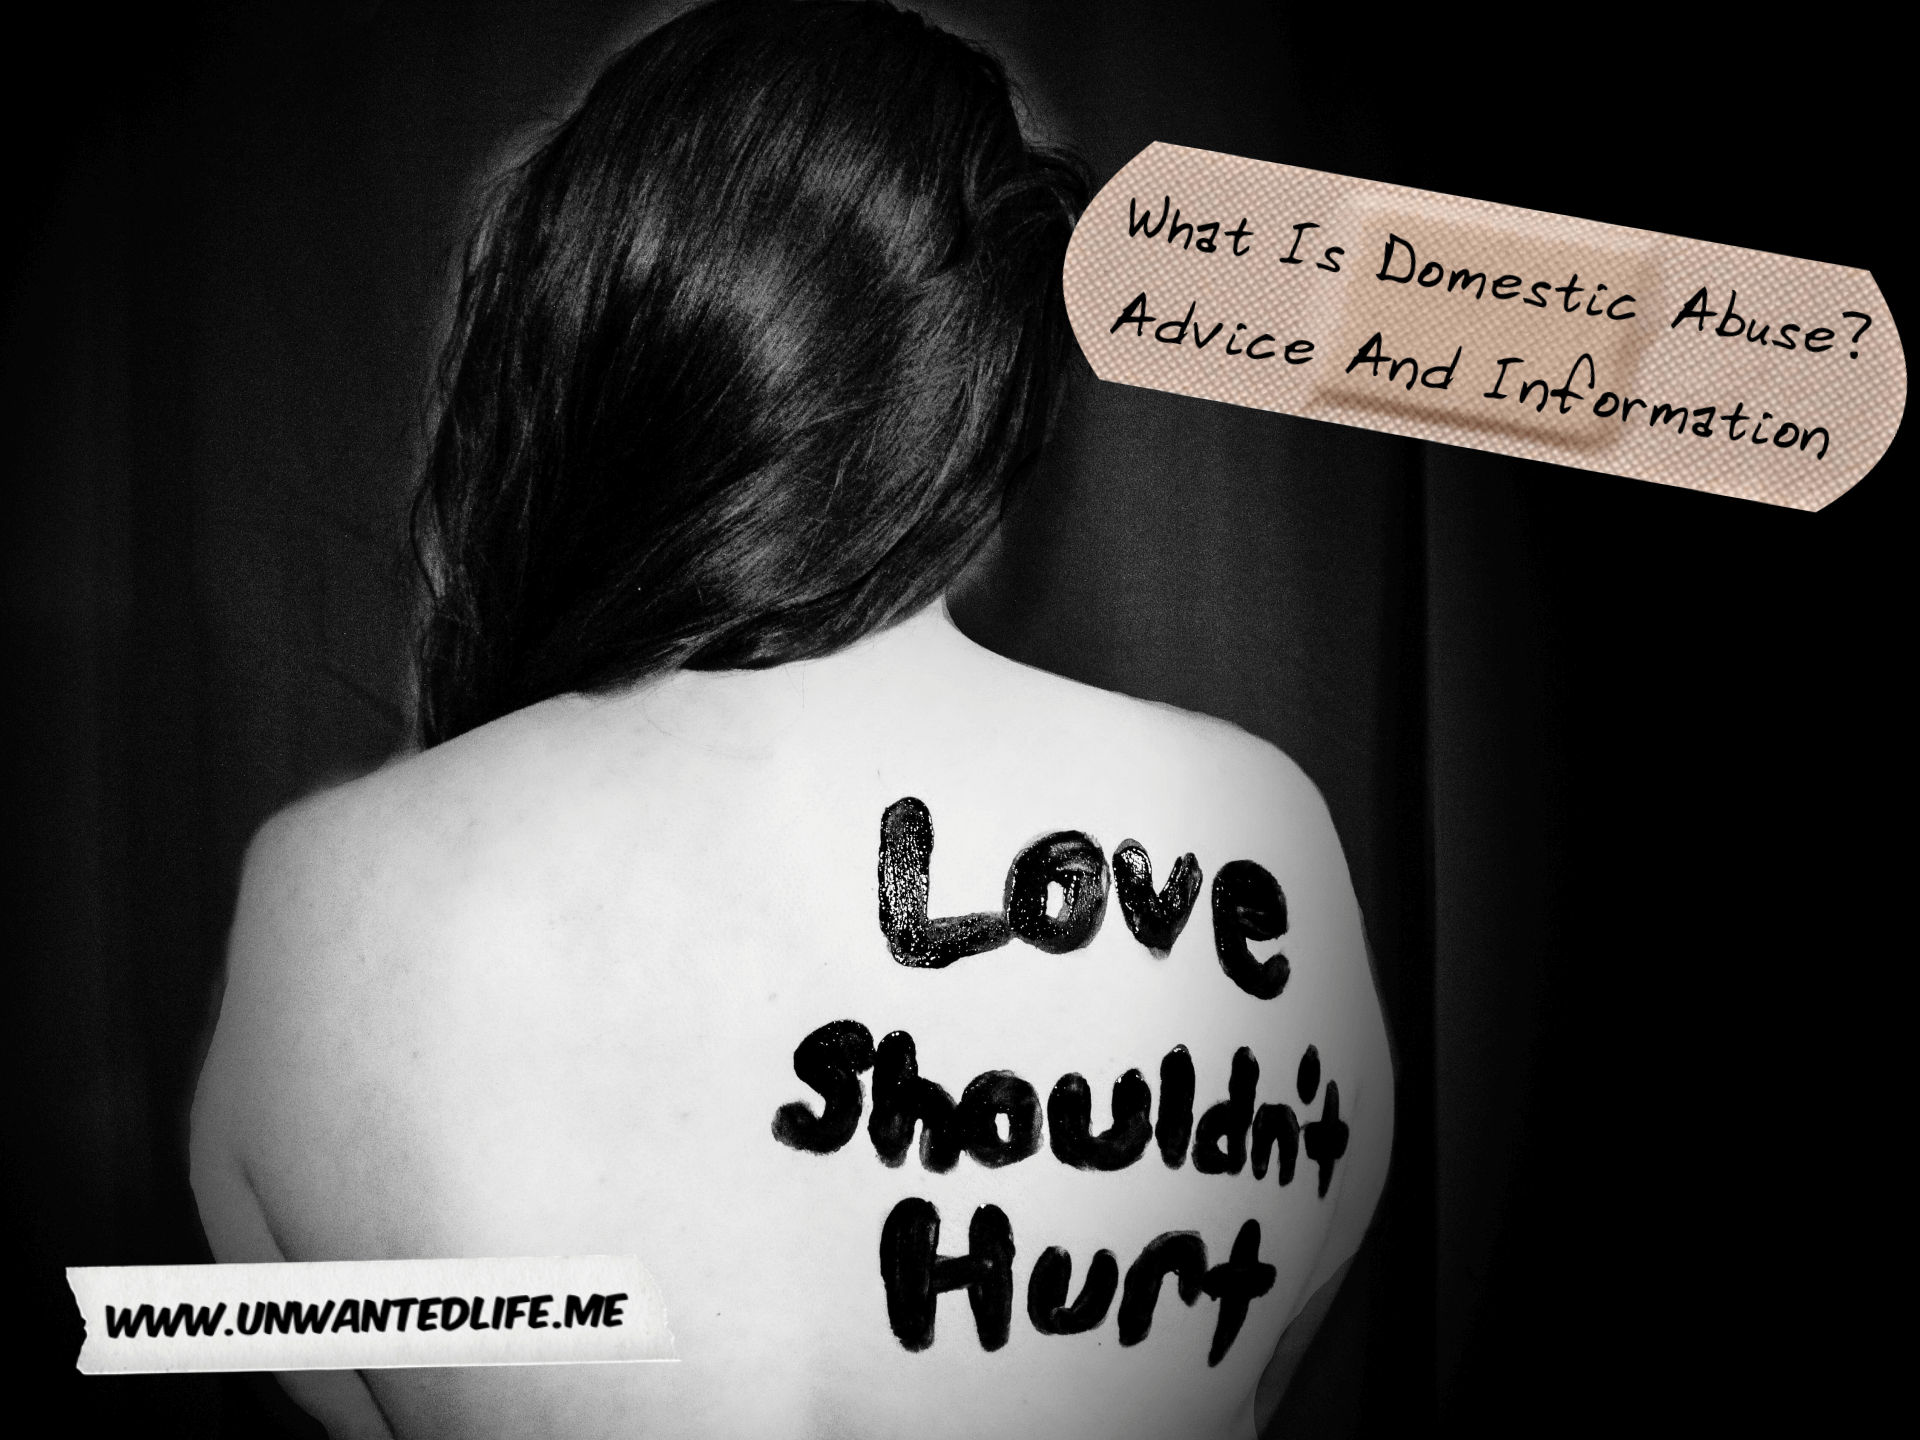 A black and white photo of a woman's back with the words wrote on it that says "love shouldn't hurt" to represent - What Is Domestic Abuse? Advice And Information